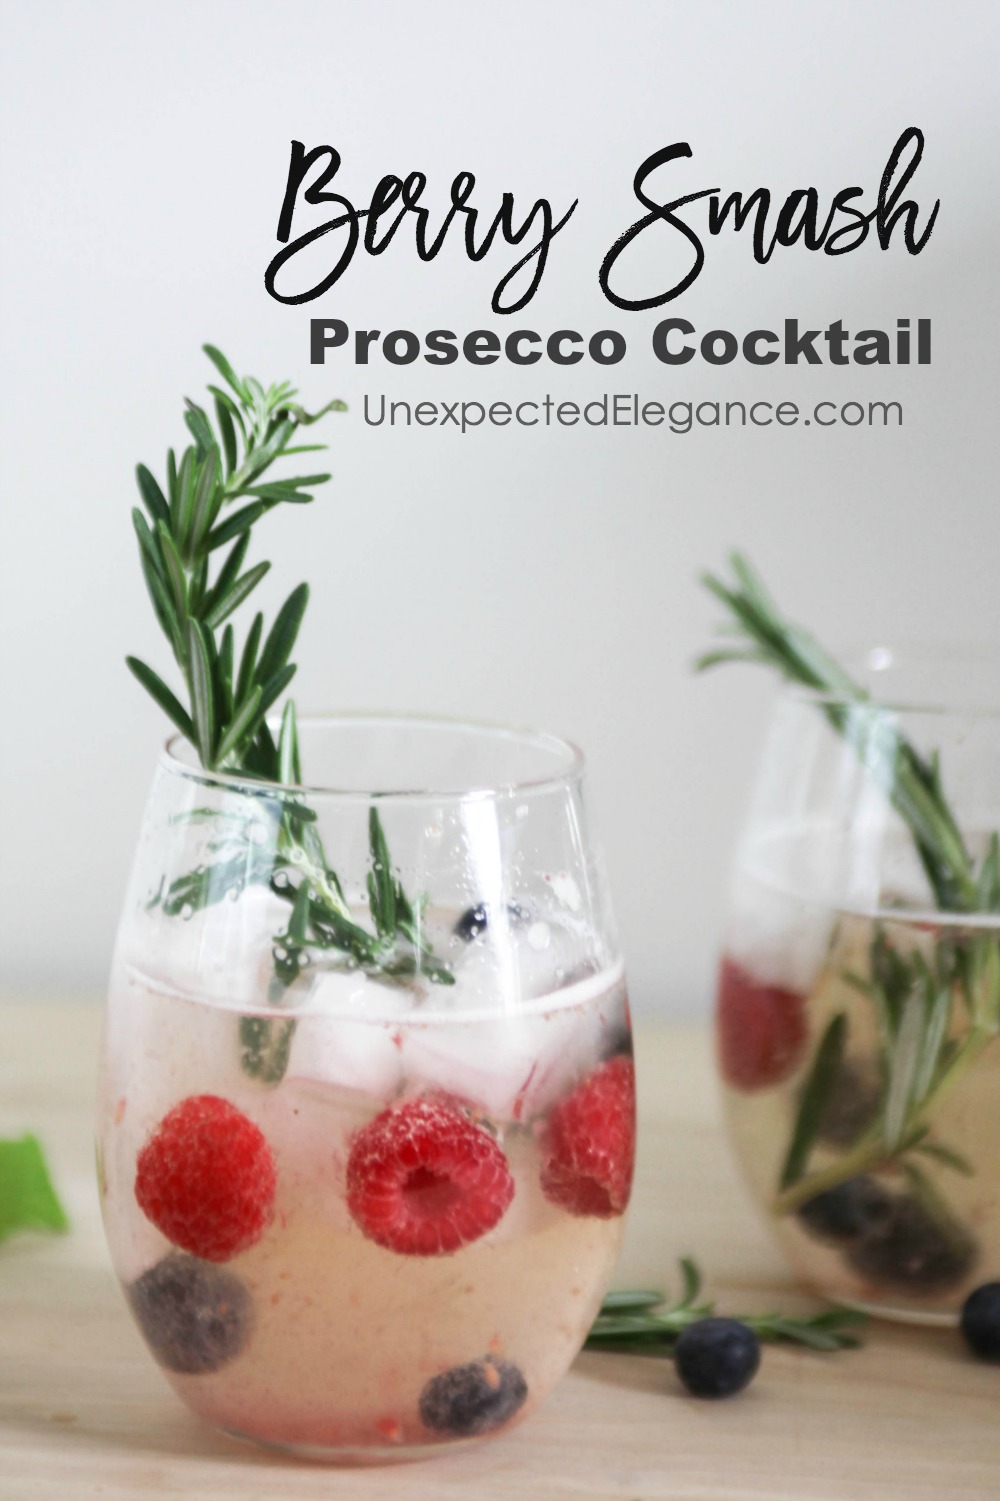 This Berry Smash Prosecco cocktail is refreshing, light and delicious!! It's perfect for a brunch, dinner, or no occasion at all.